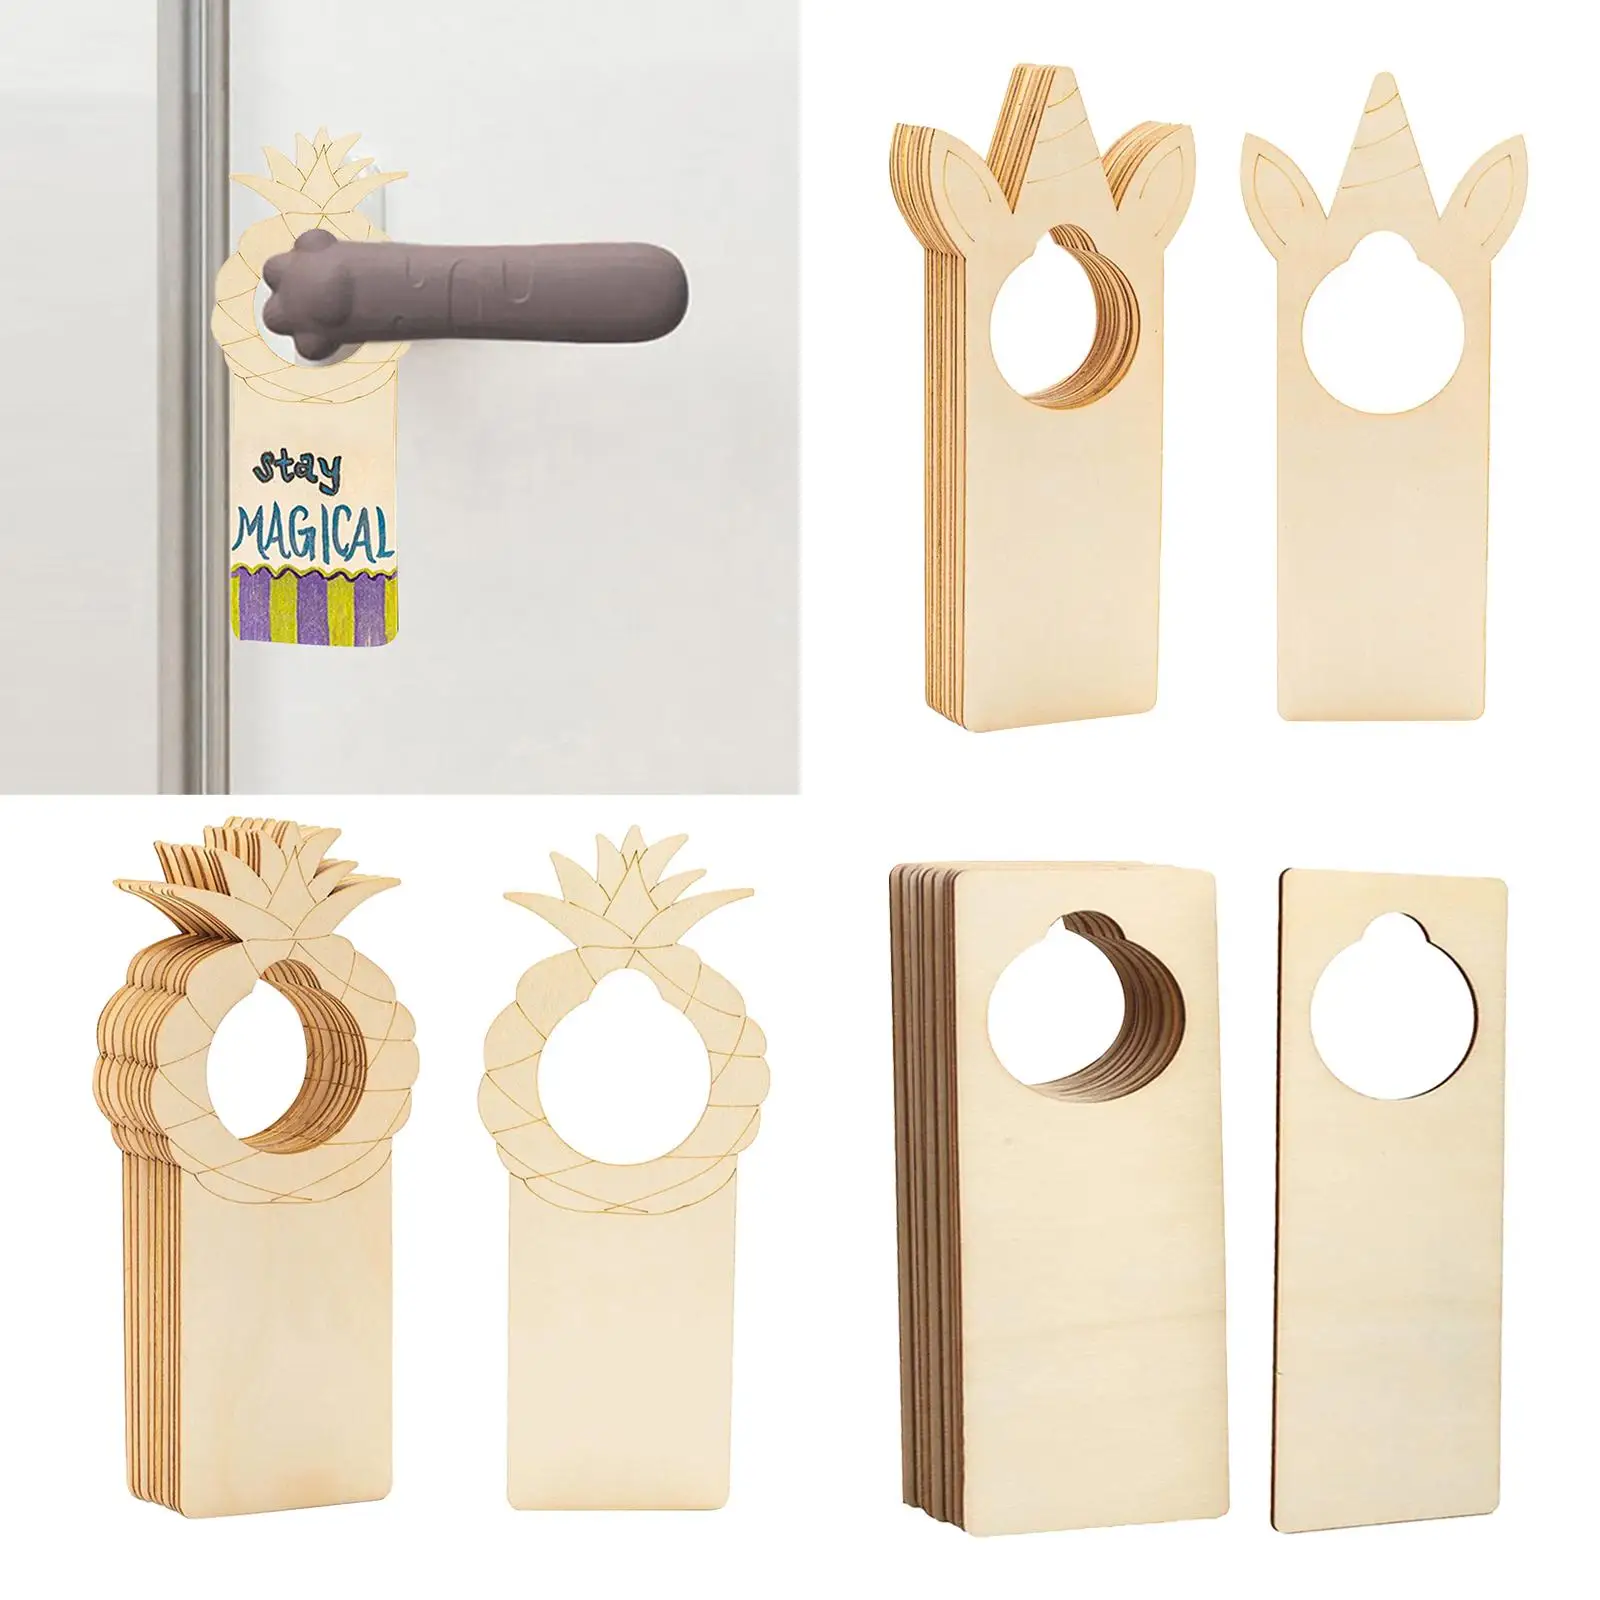 10 Pieces Unfinished Wood Door Knob Hangers Ornaments Slice Lightweight Hanging Tags for Painting Business Use Office Dorm Decor